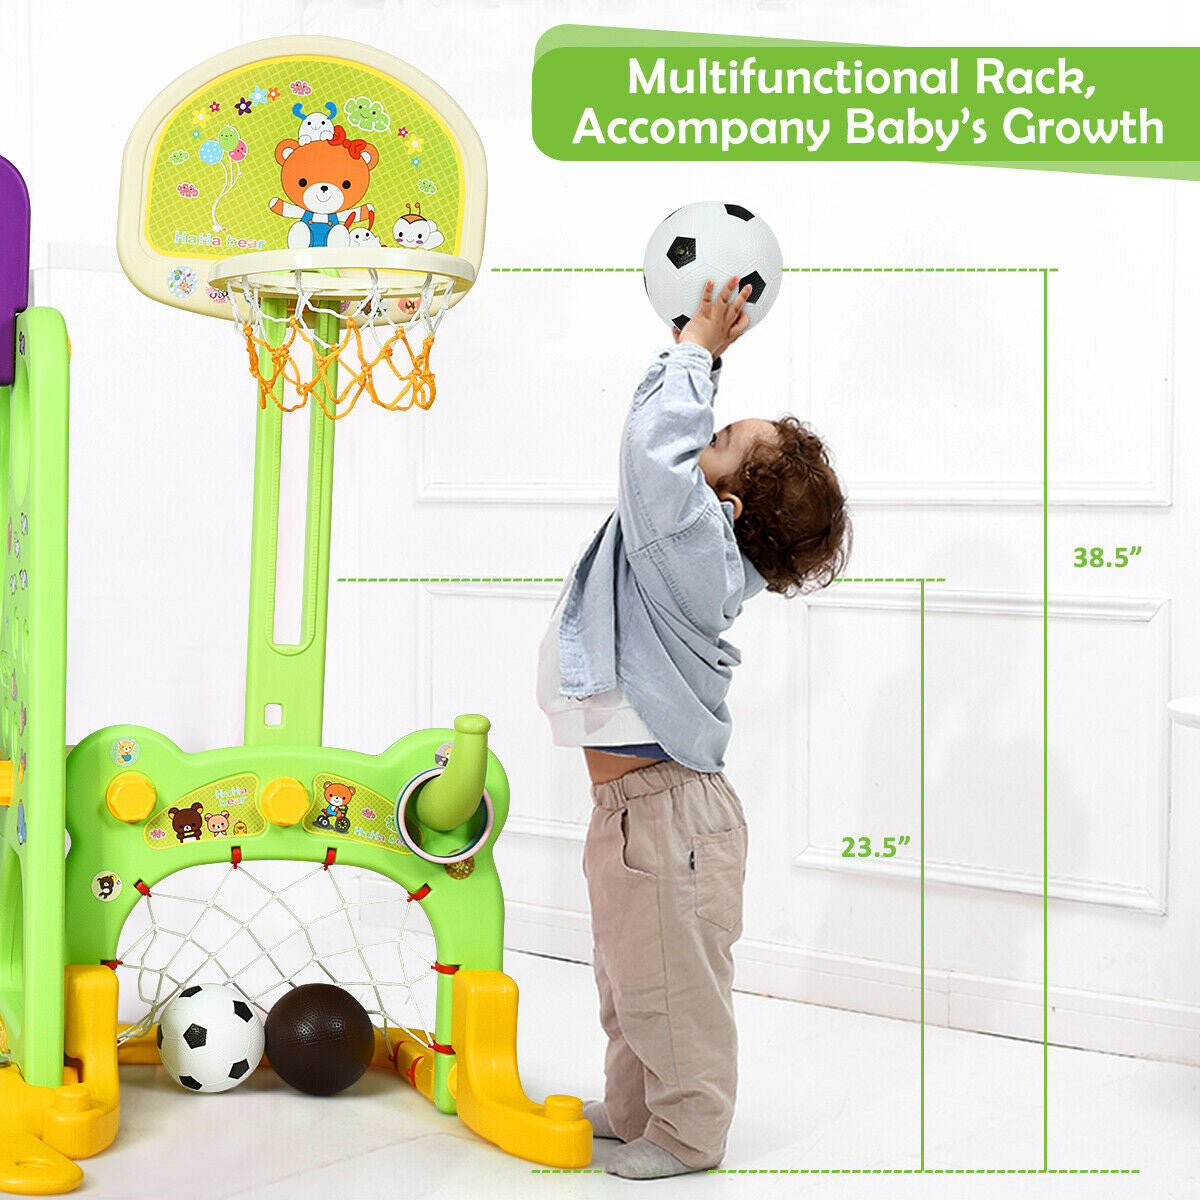 Adjustable Basketball Rack and Football Gate: Allowing for growth and offering the option for challenging outdoor sports. Extra basketball, football, and ringtoss accessories are included.